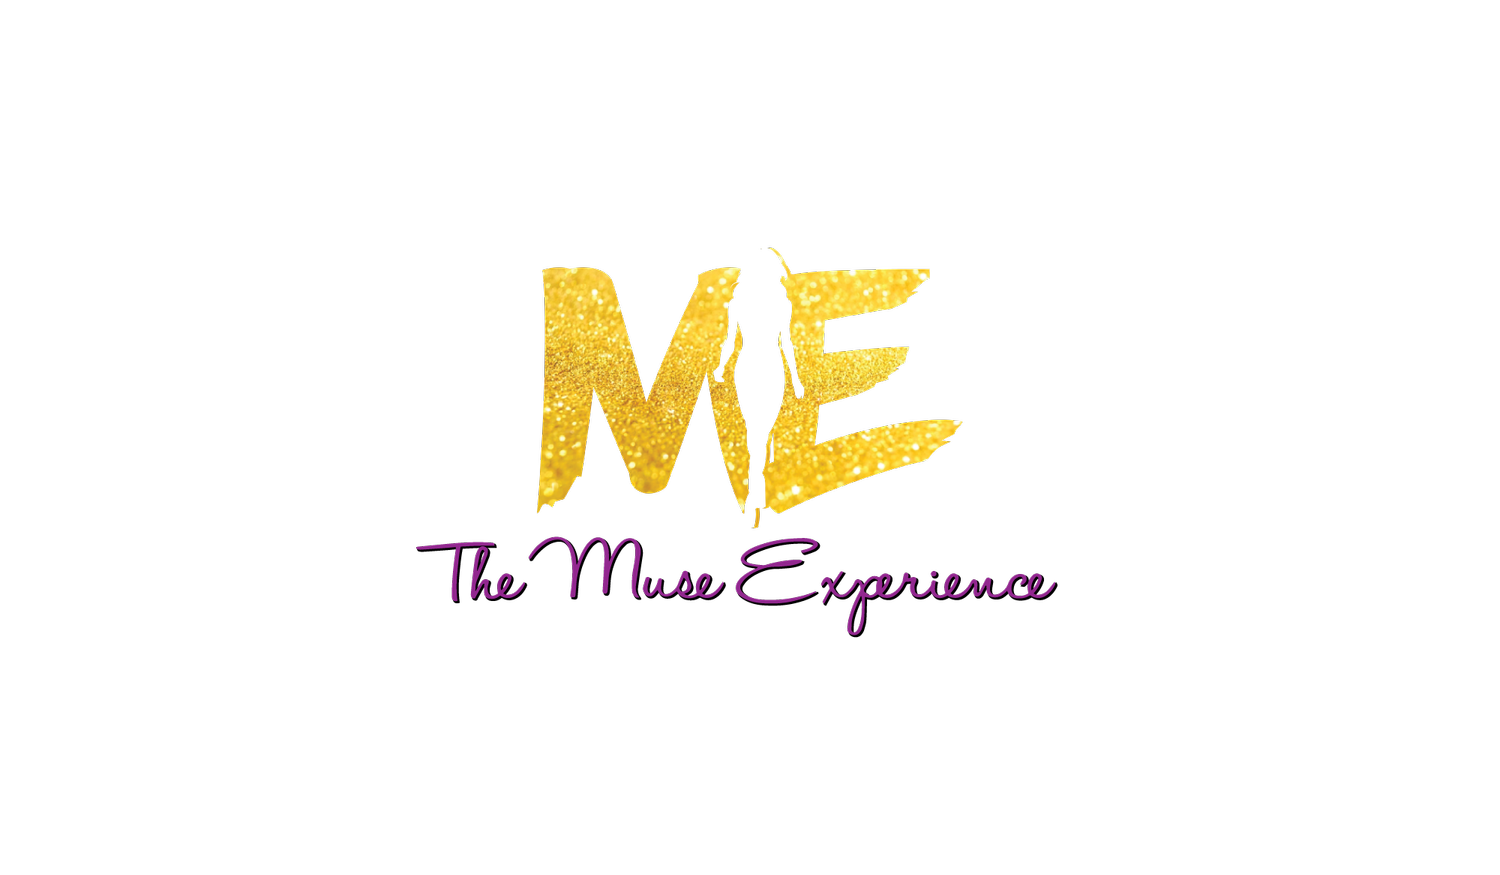 The Muse Experience